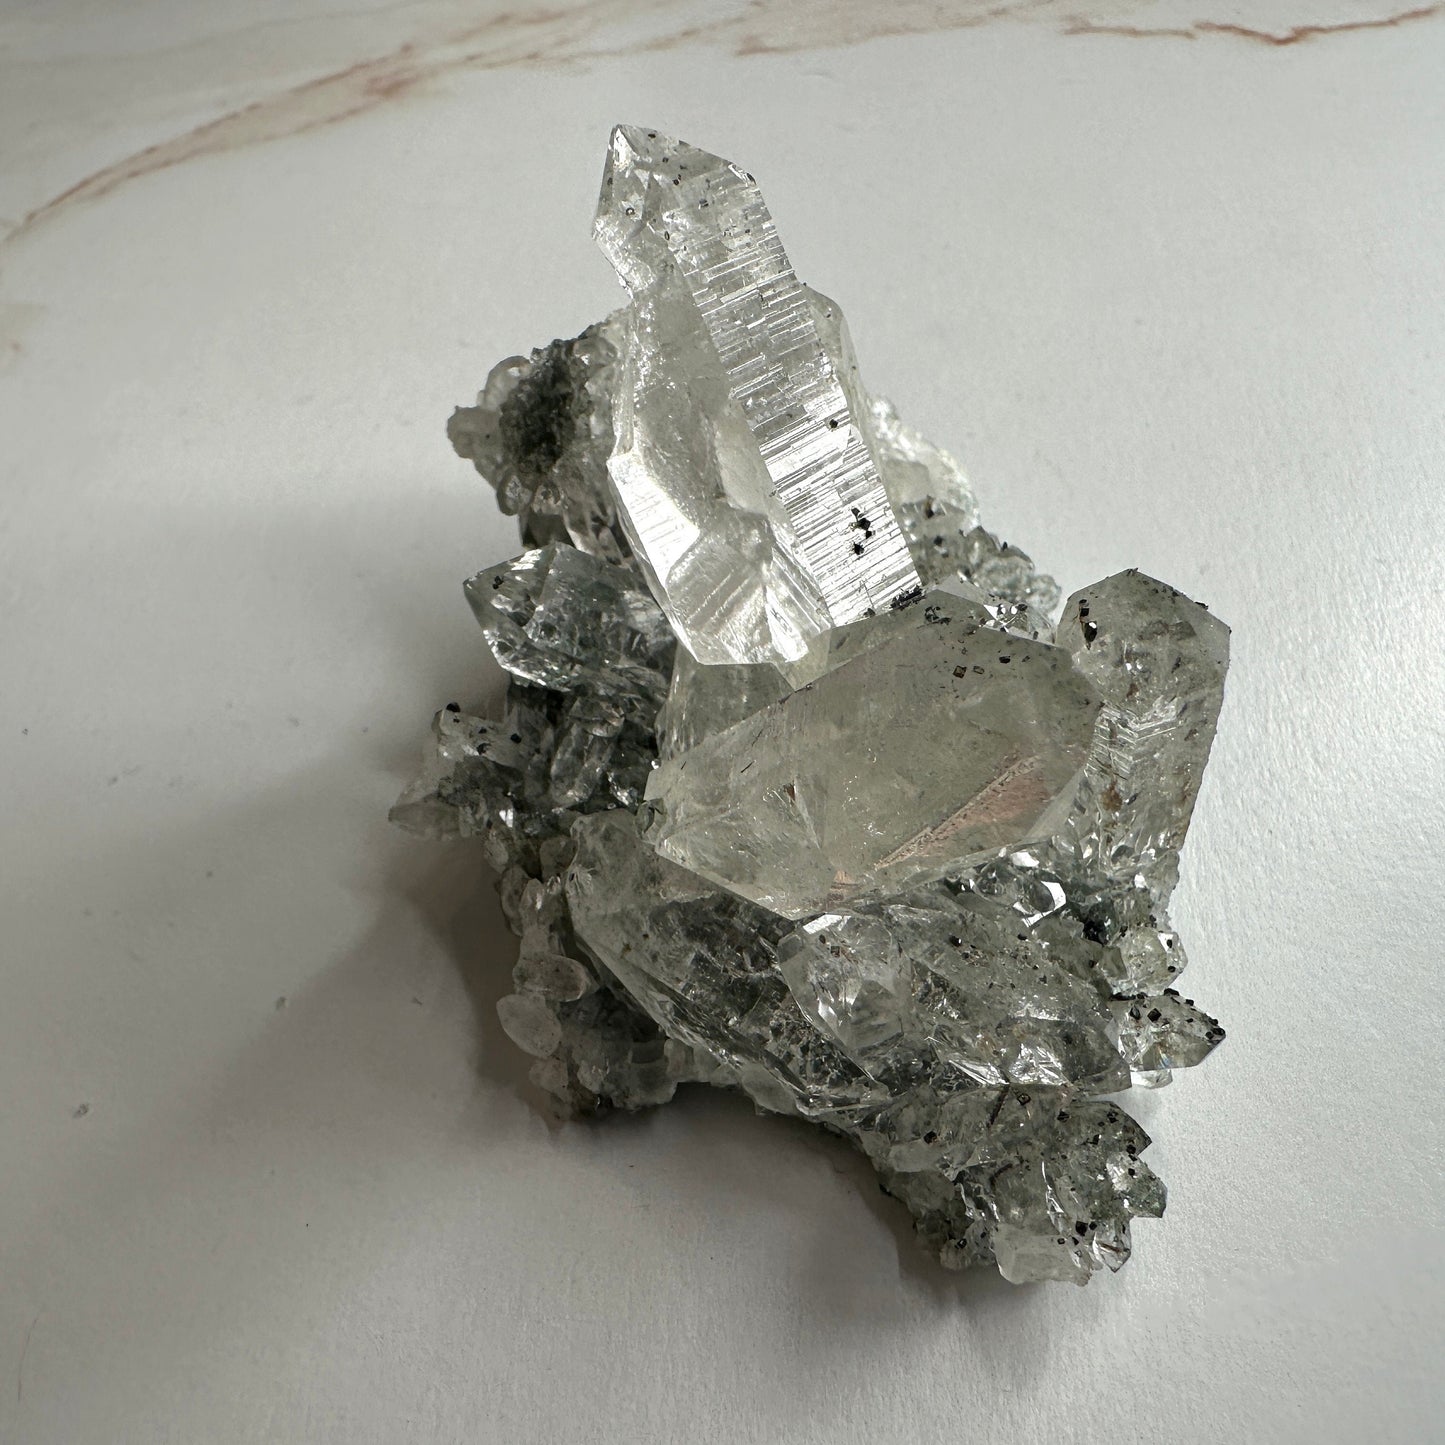 Chlorite Himalayan Quartz Specimen Cluster With Anatase From India AAA+ grade | Tucson Gem Show Exclusive